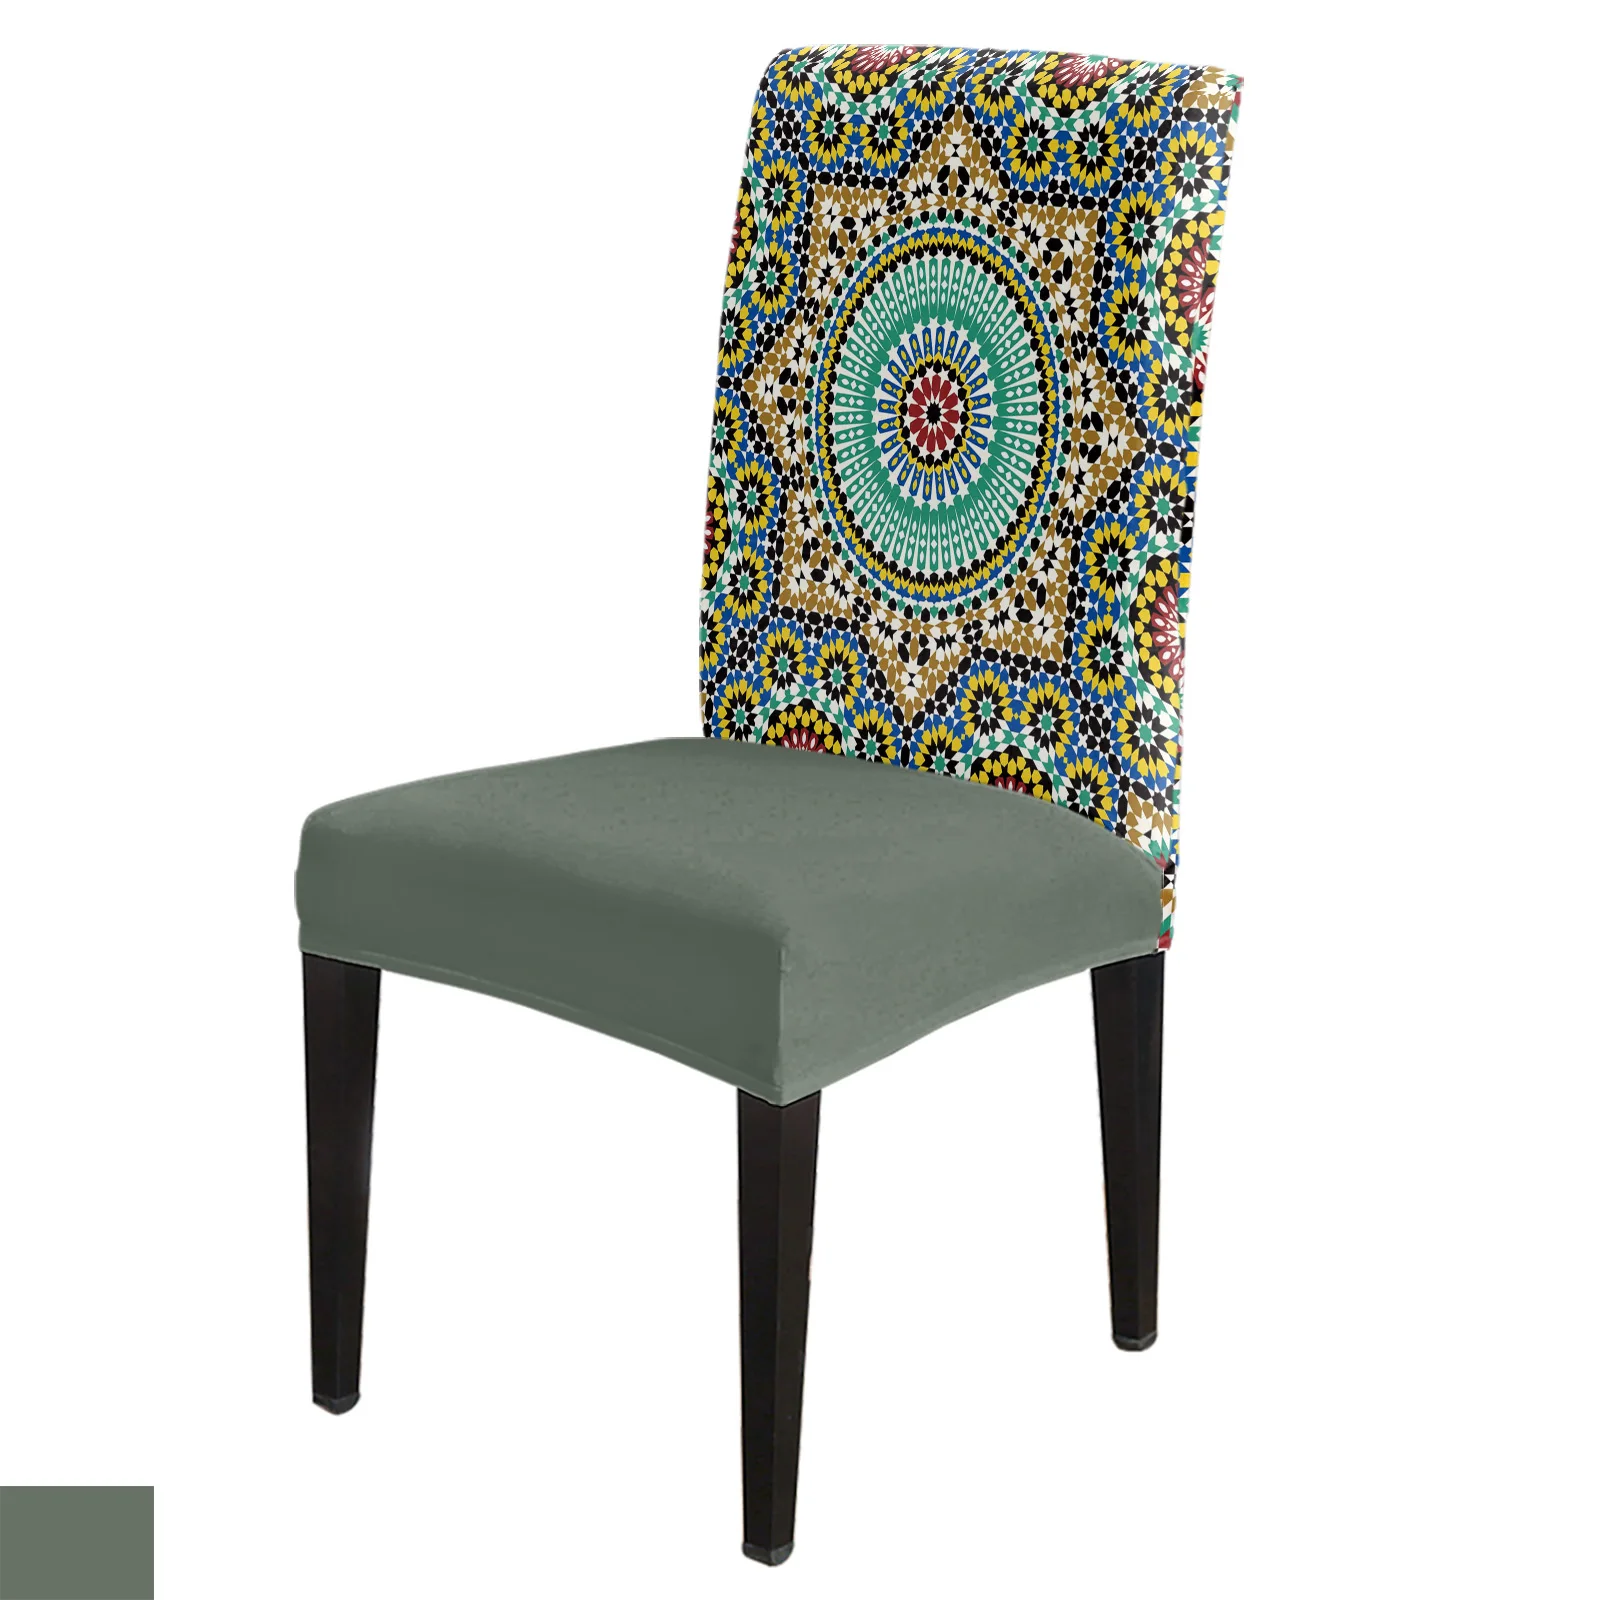 

Morocco Colorful Flowers Arabesque Dining Chair Cover Kitchen Stretch Spandex Seat Slipcover for Banquet Wedding Party